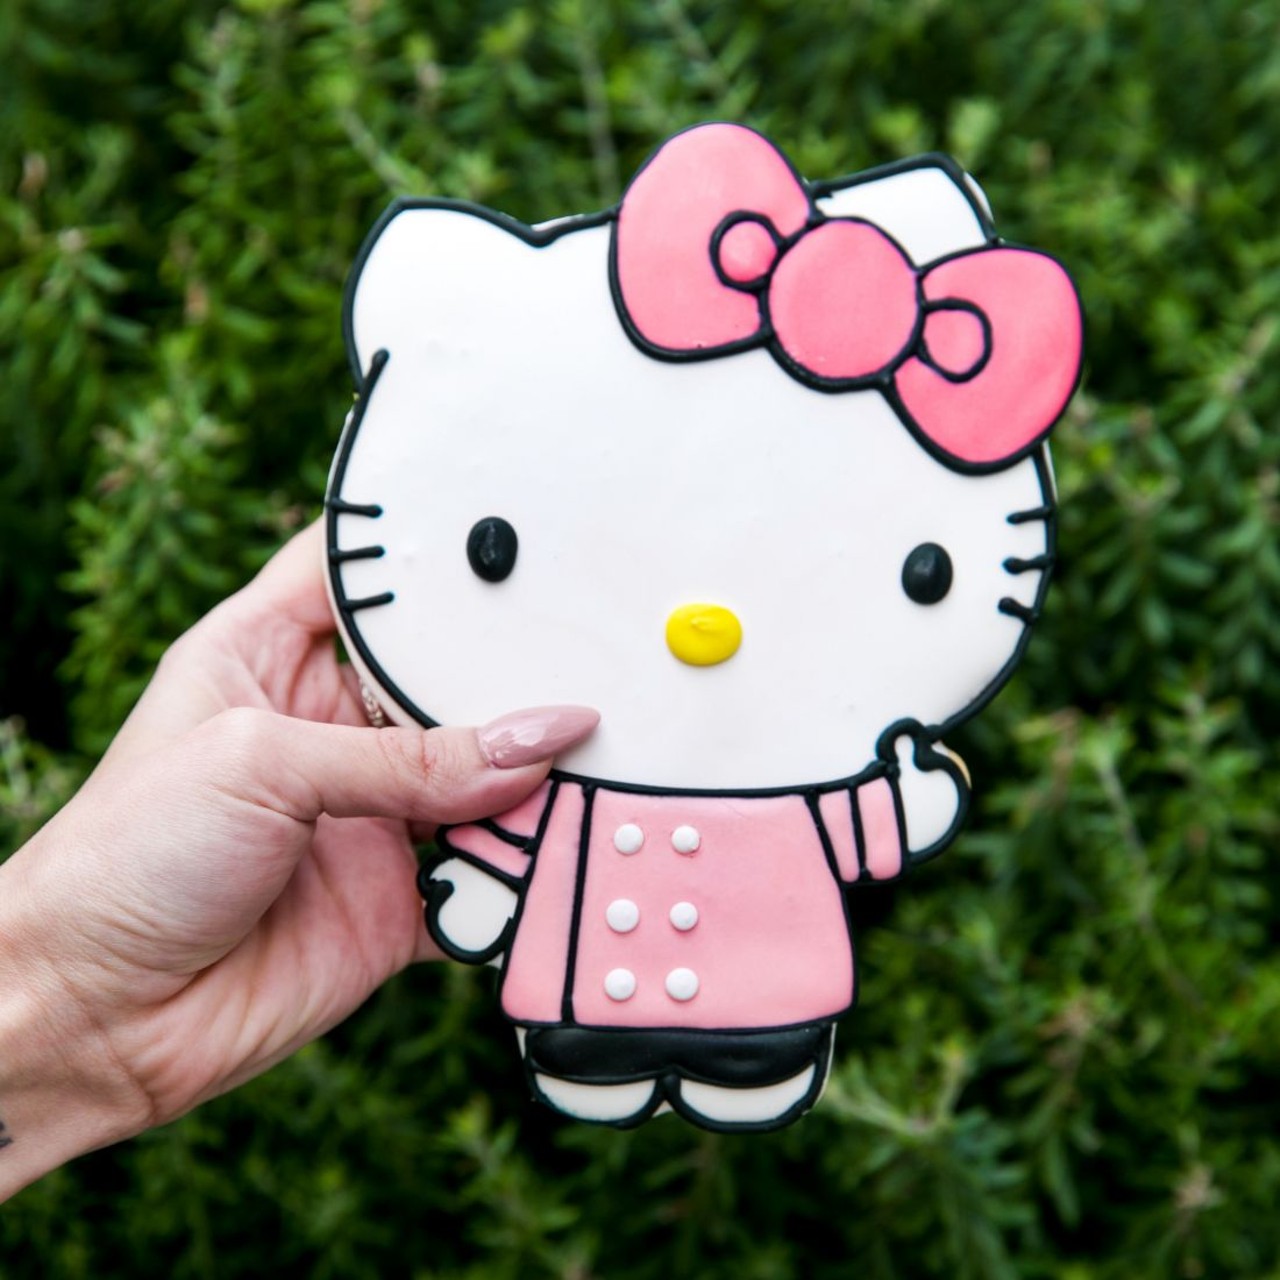 The Hello Kitty Cafe Truck Is Returning to St. Louis This Weekend [PHOTOS]